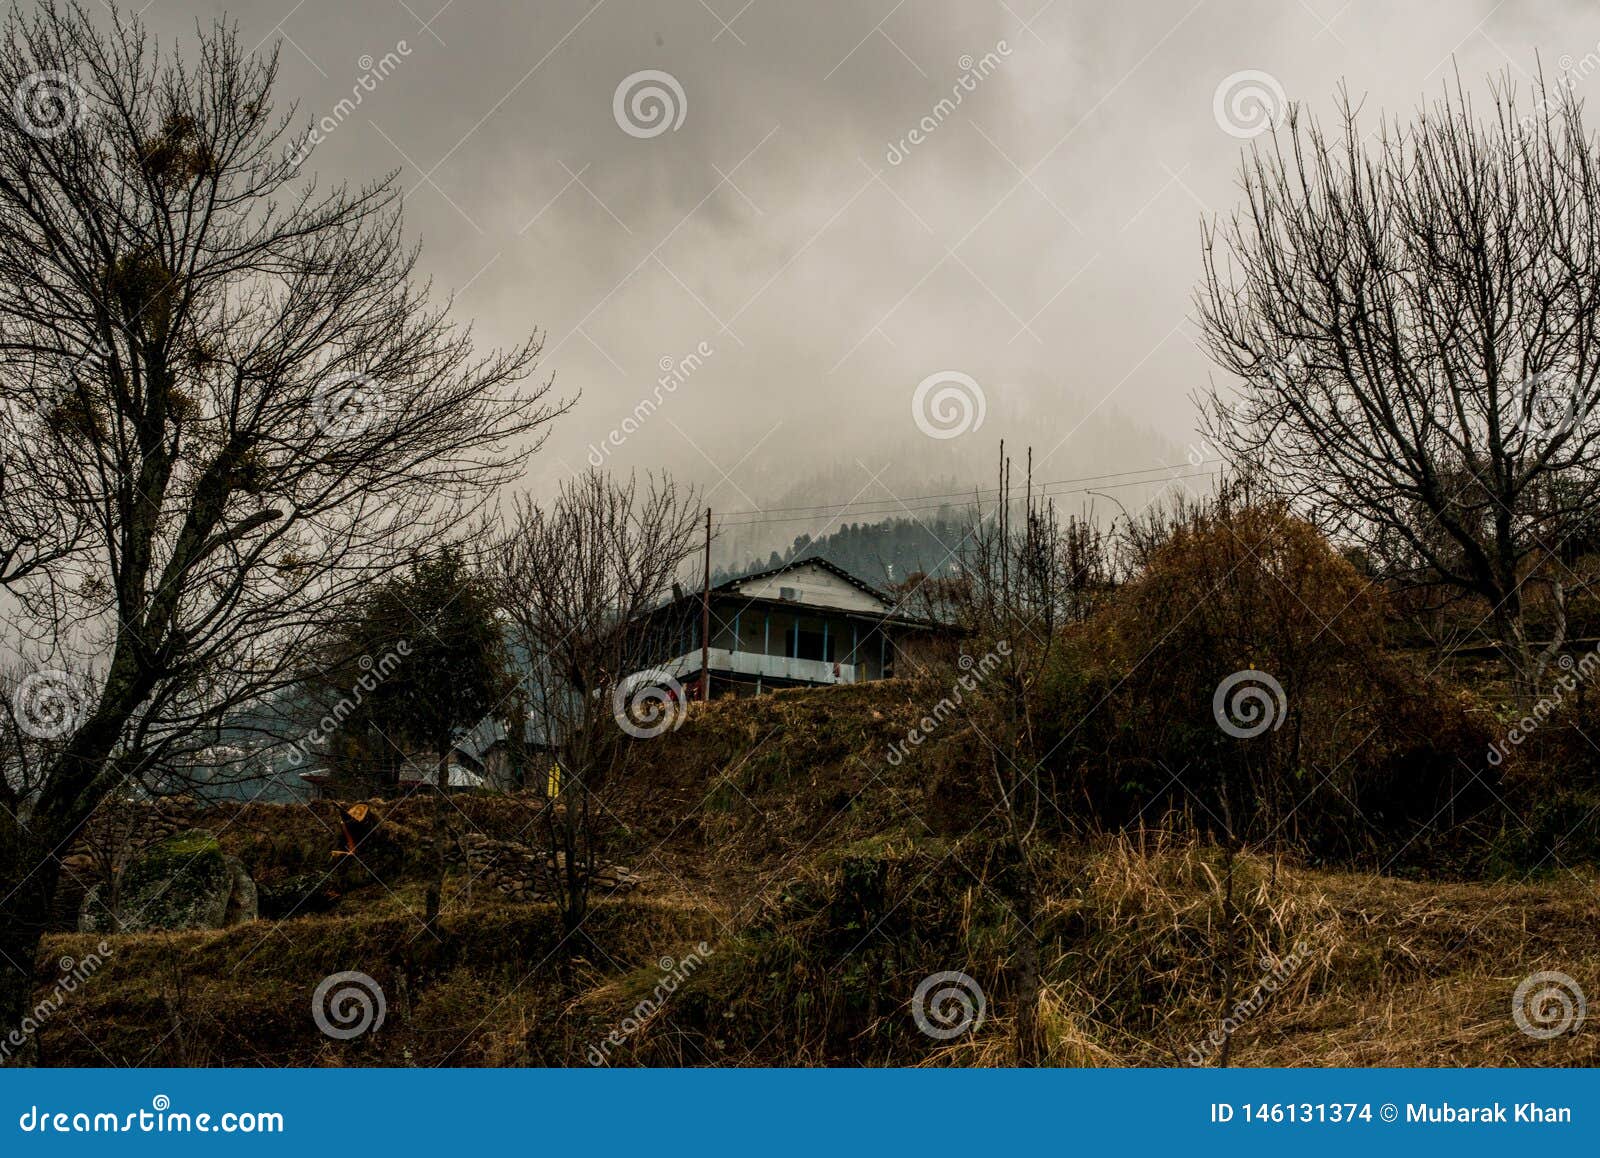 Typical Wooden Alpine House in Himachal in Himalayas Stock Photo ...